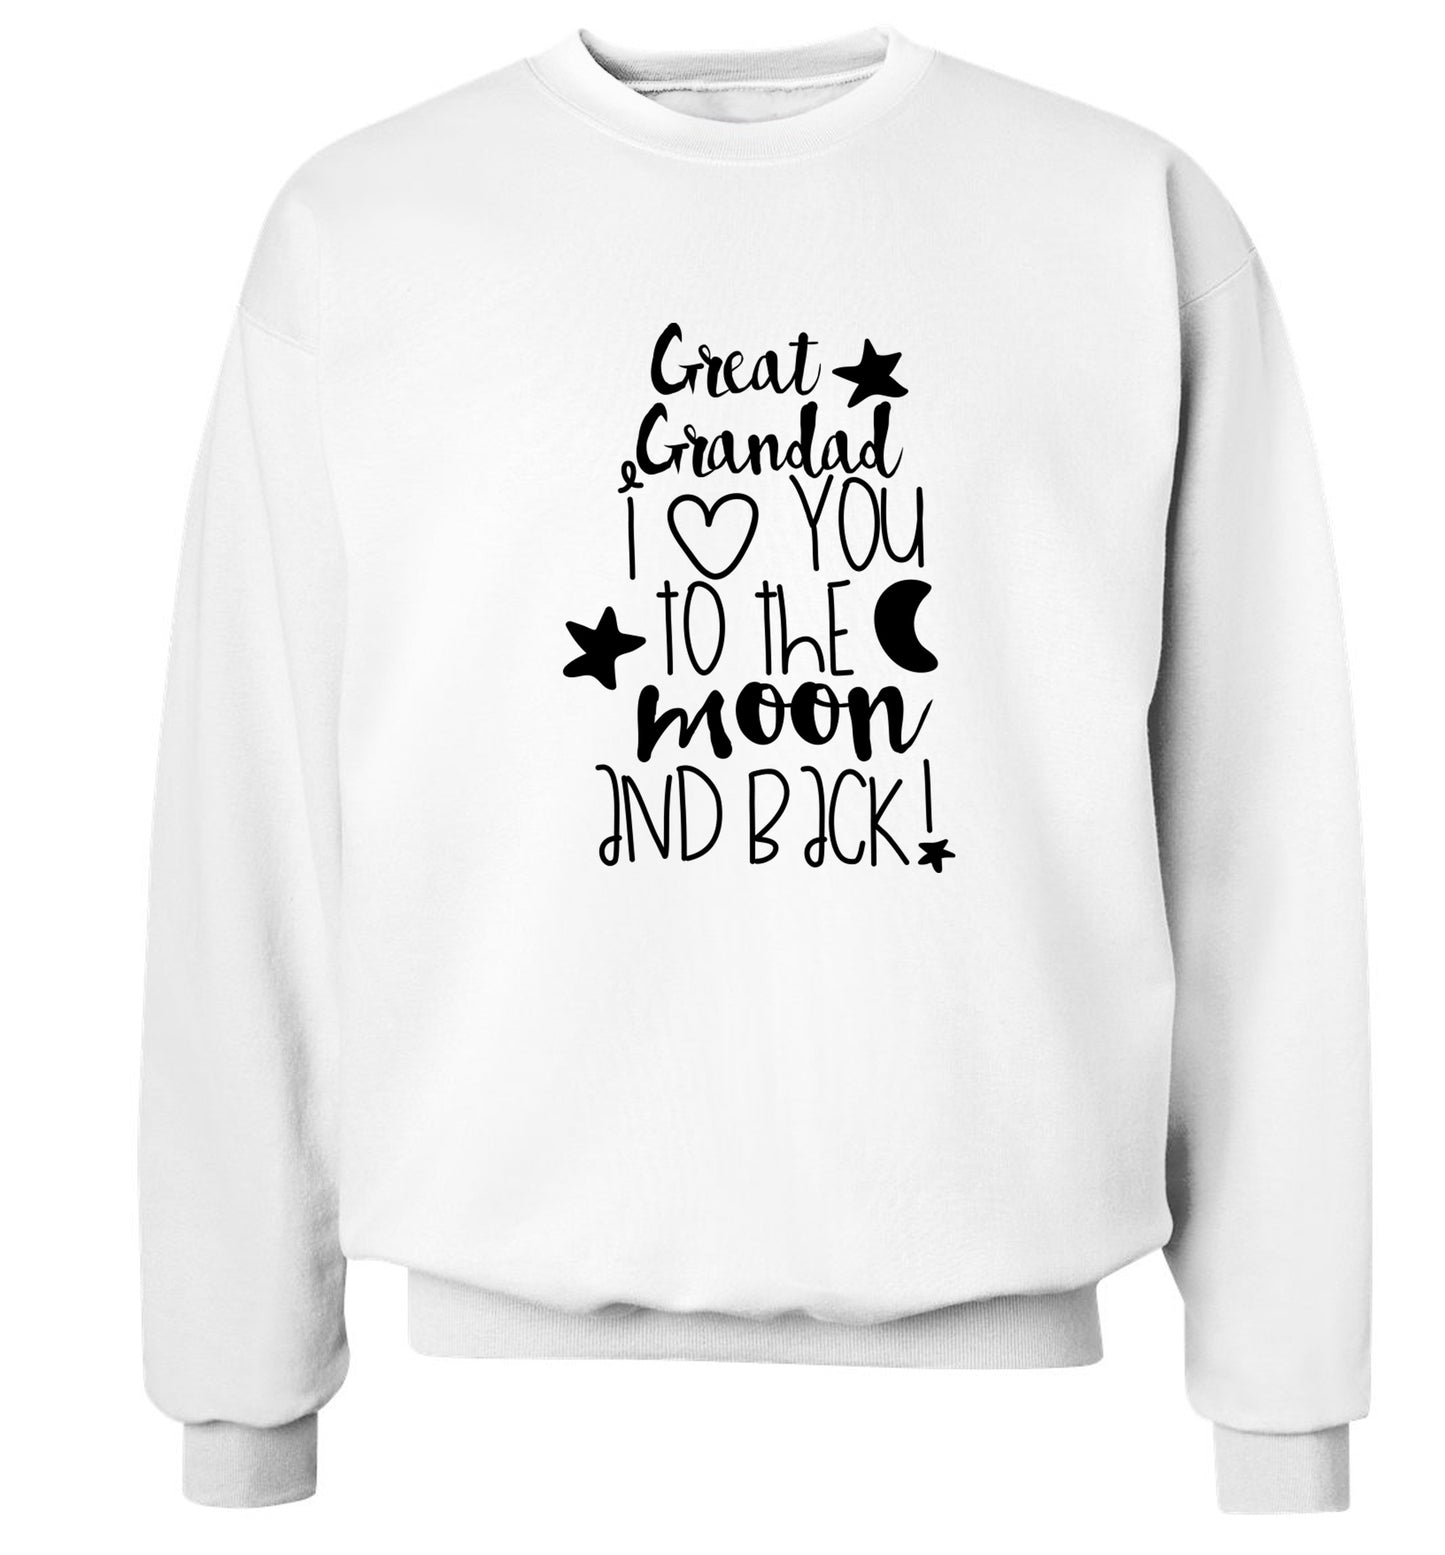 Great Grandad I love you to the moon and back Adult's unisex white  sweater 2XL